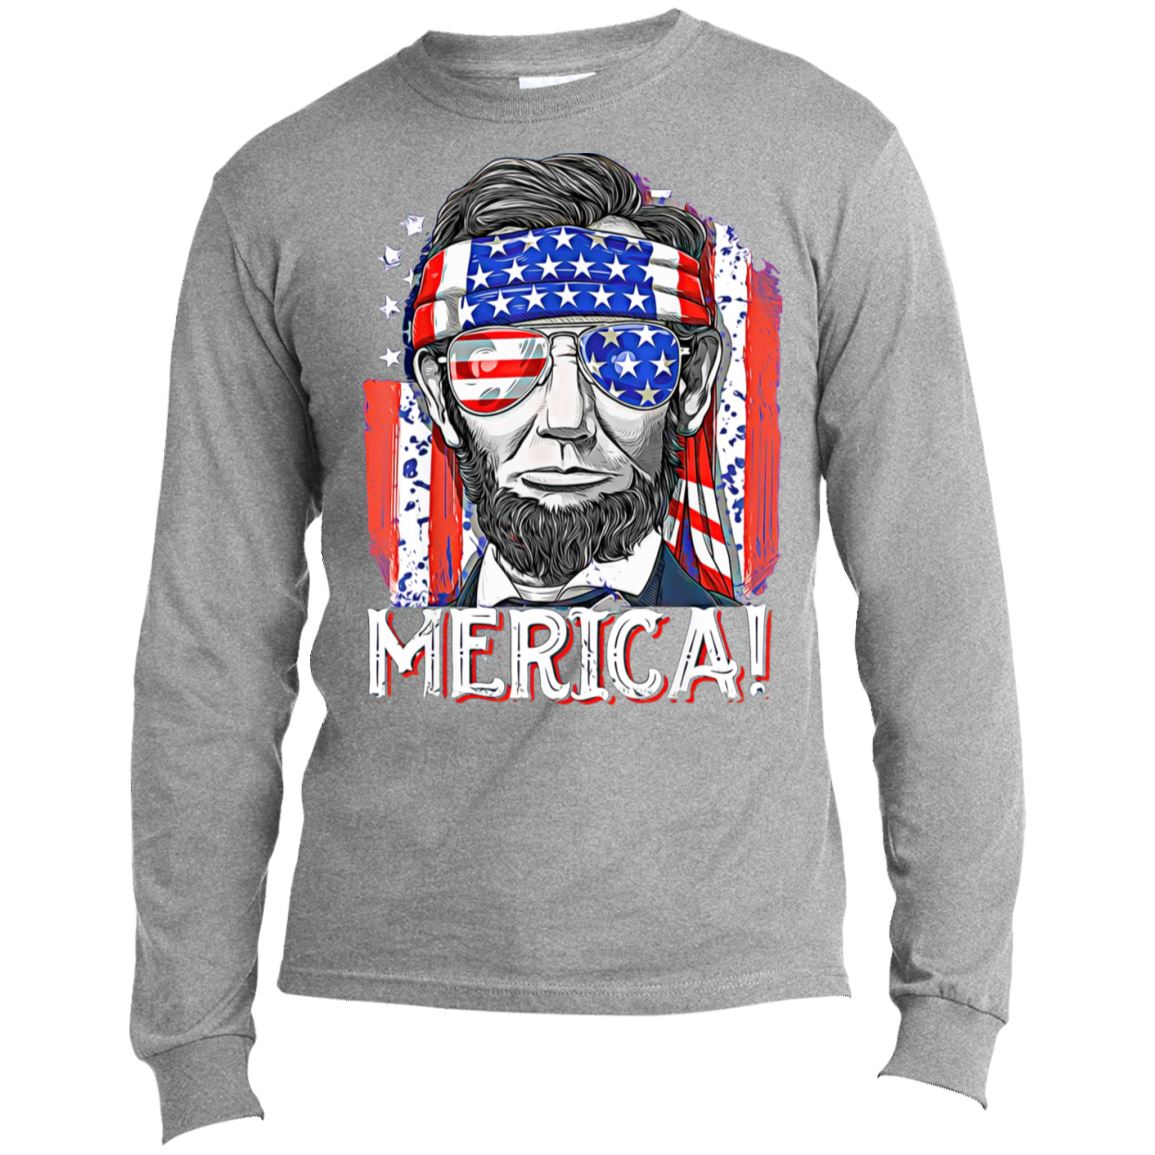 Abe-Merica USA100LS Long Sleeve Made in the US T-Shirt - Houseboat Kings